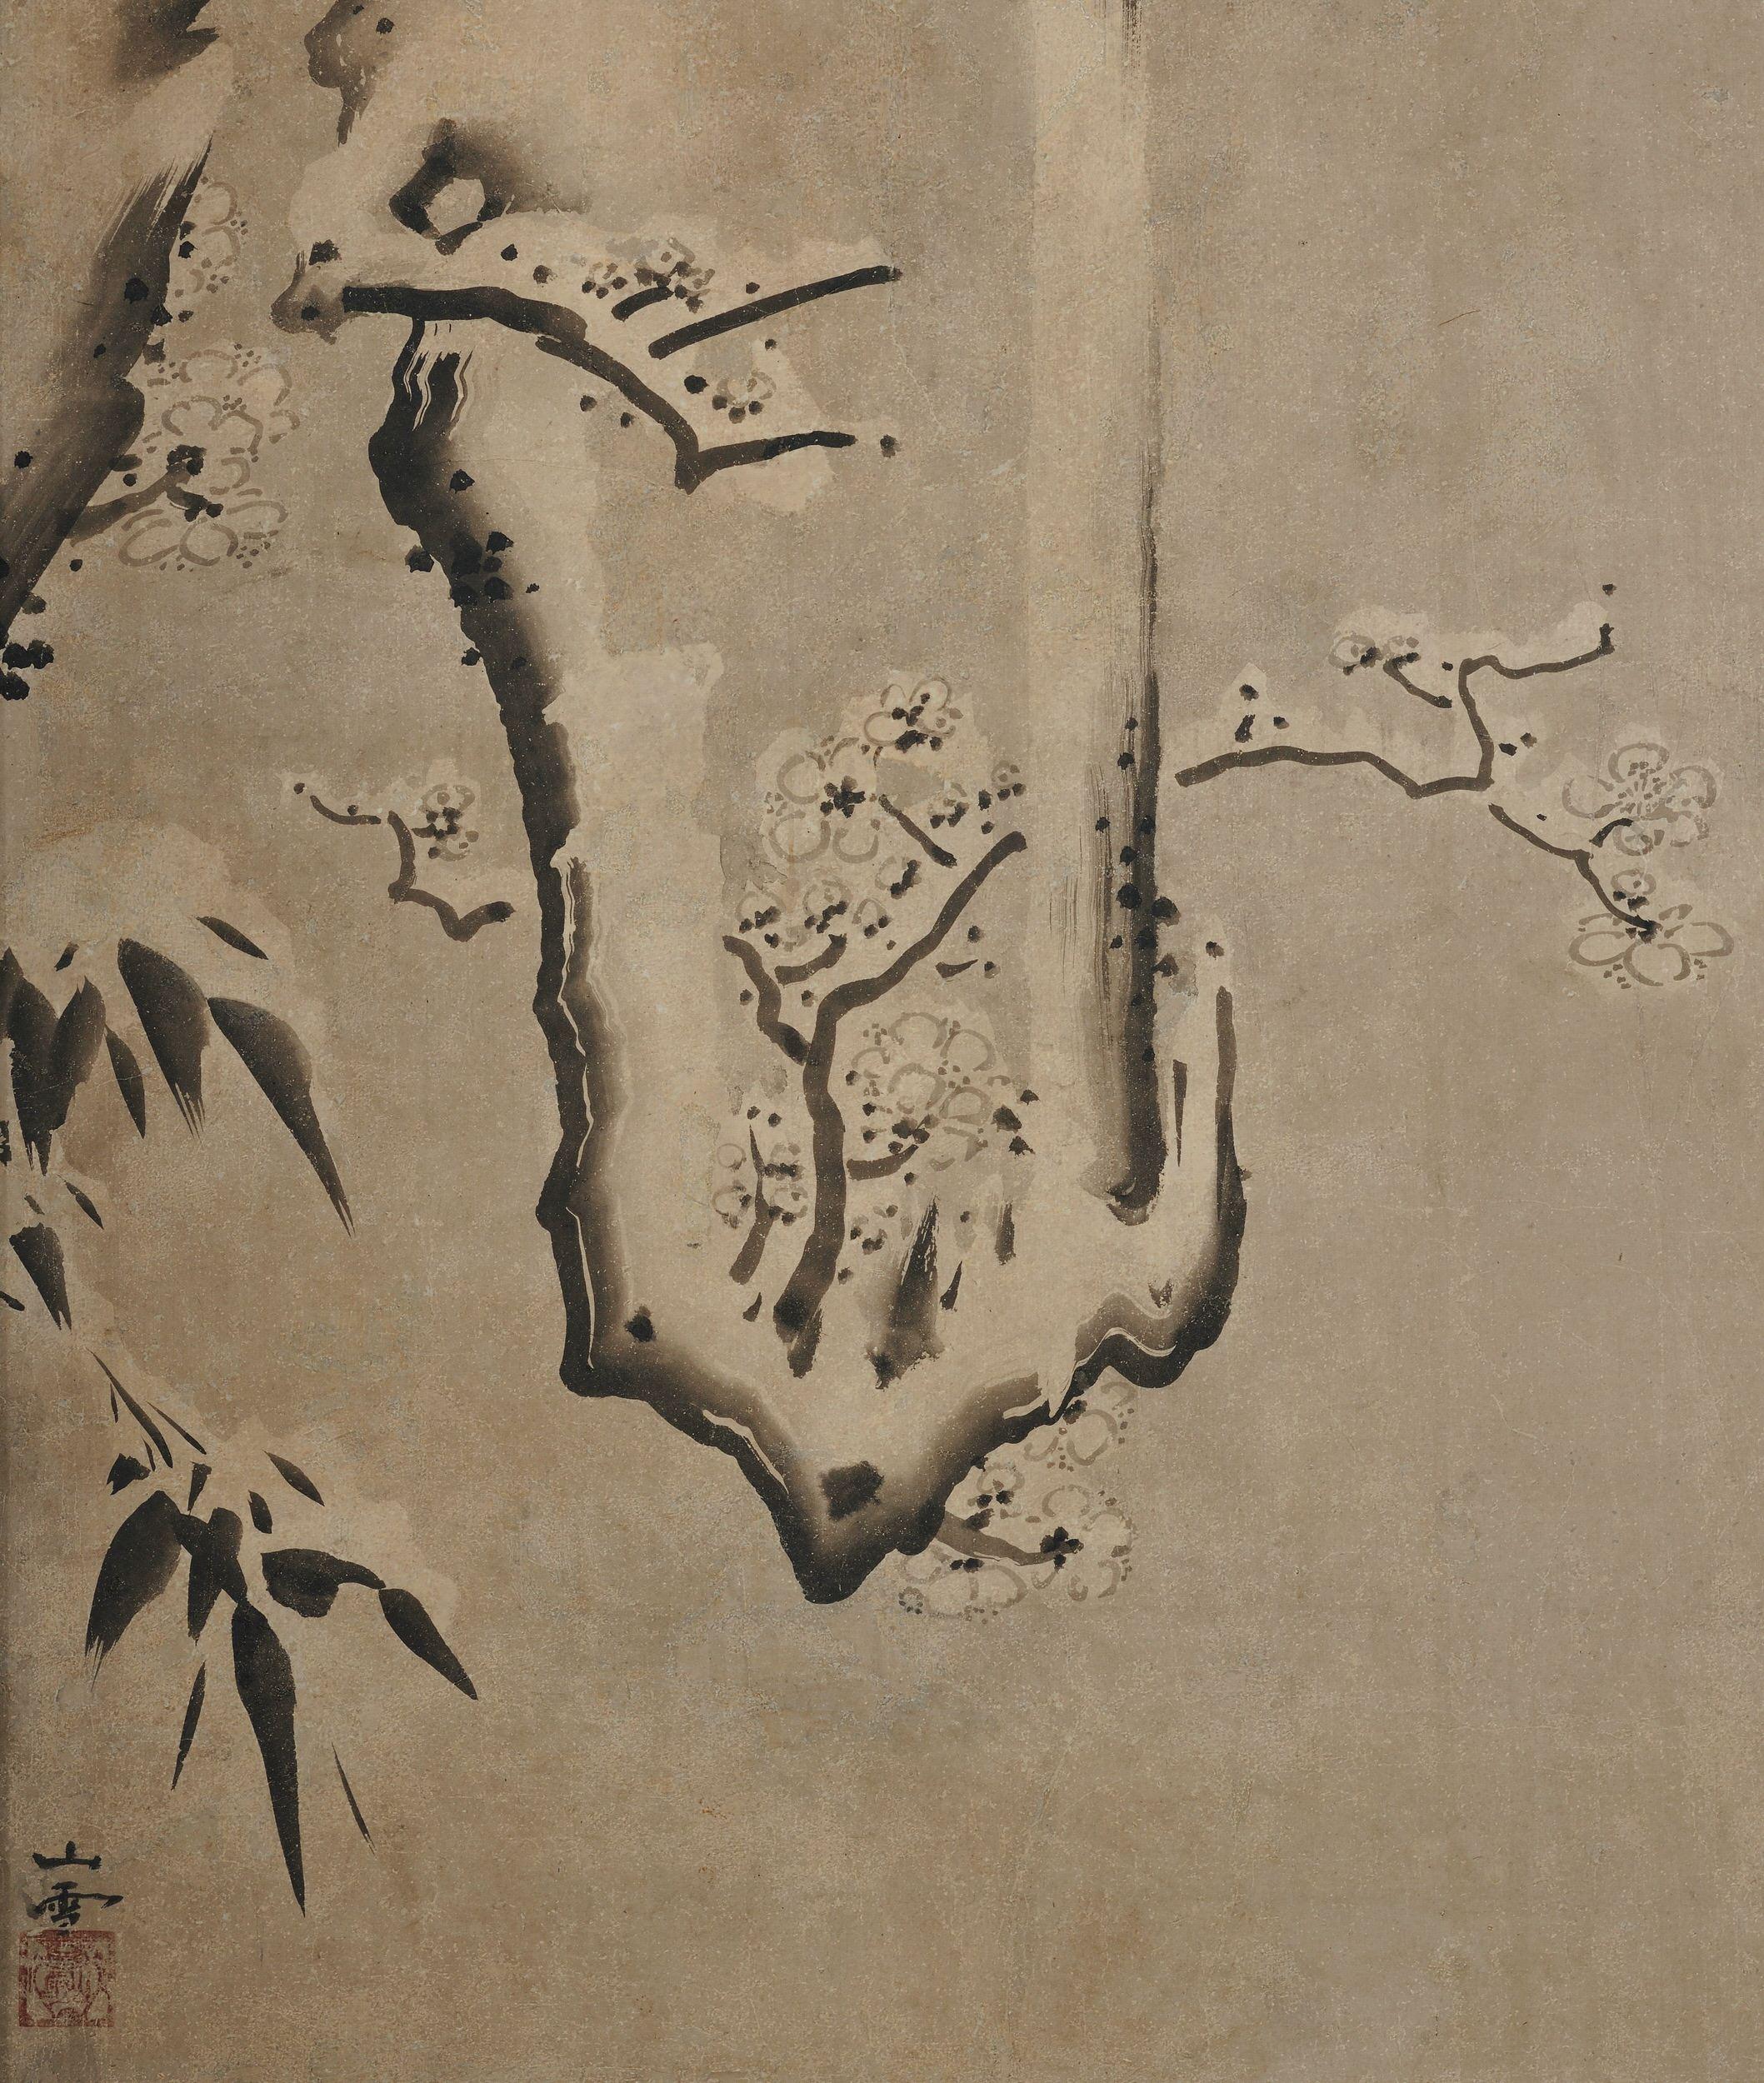 Kano Sansetsu (1589-1651)

Plum blossoms in snow

Edo period, circa 1640

Framed painting. Ink on paper.

Kano Sansetsu is a Japanese painter who represented the Kyo Kano (Kyoto Kano) school from the end of Momoyama to the early Edo period.